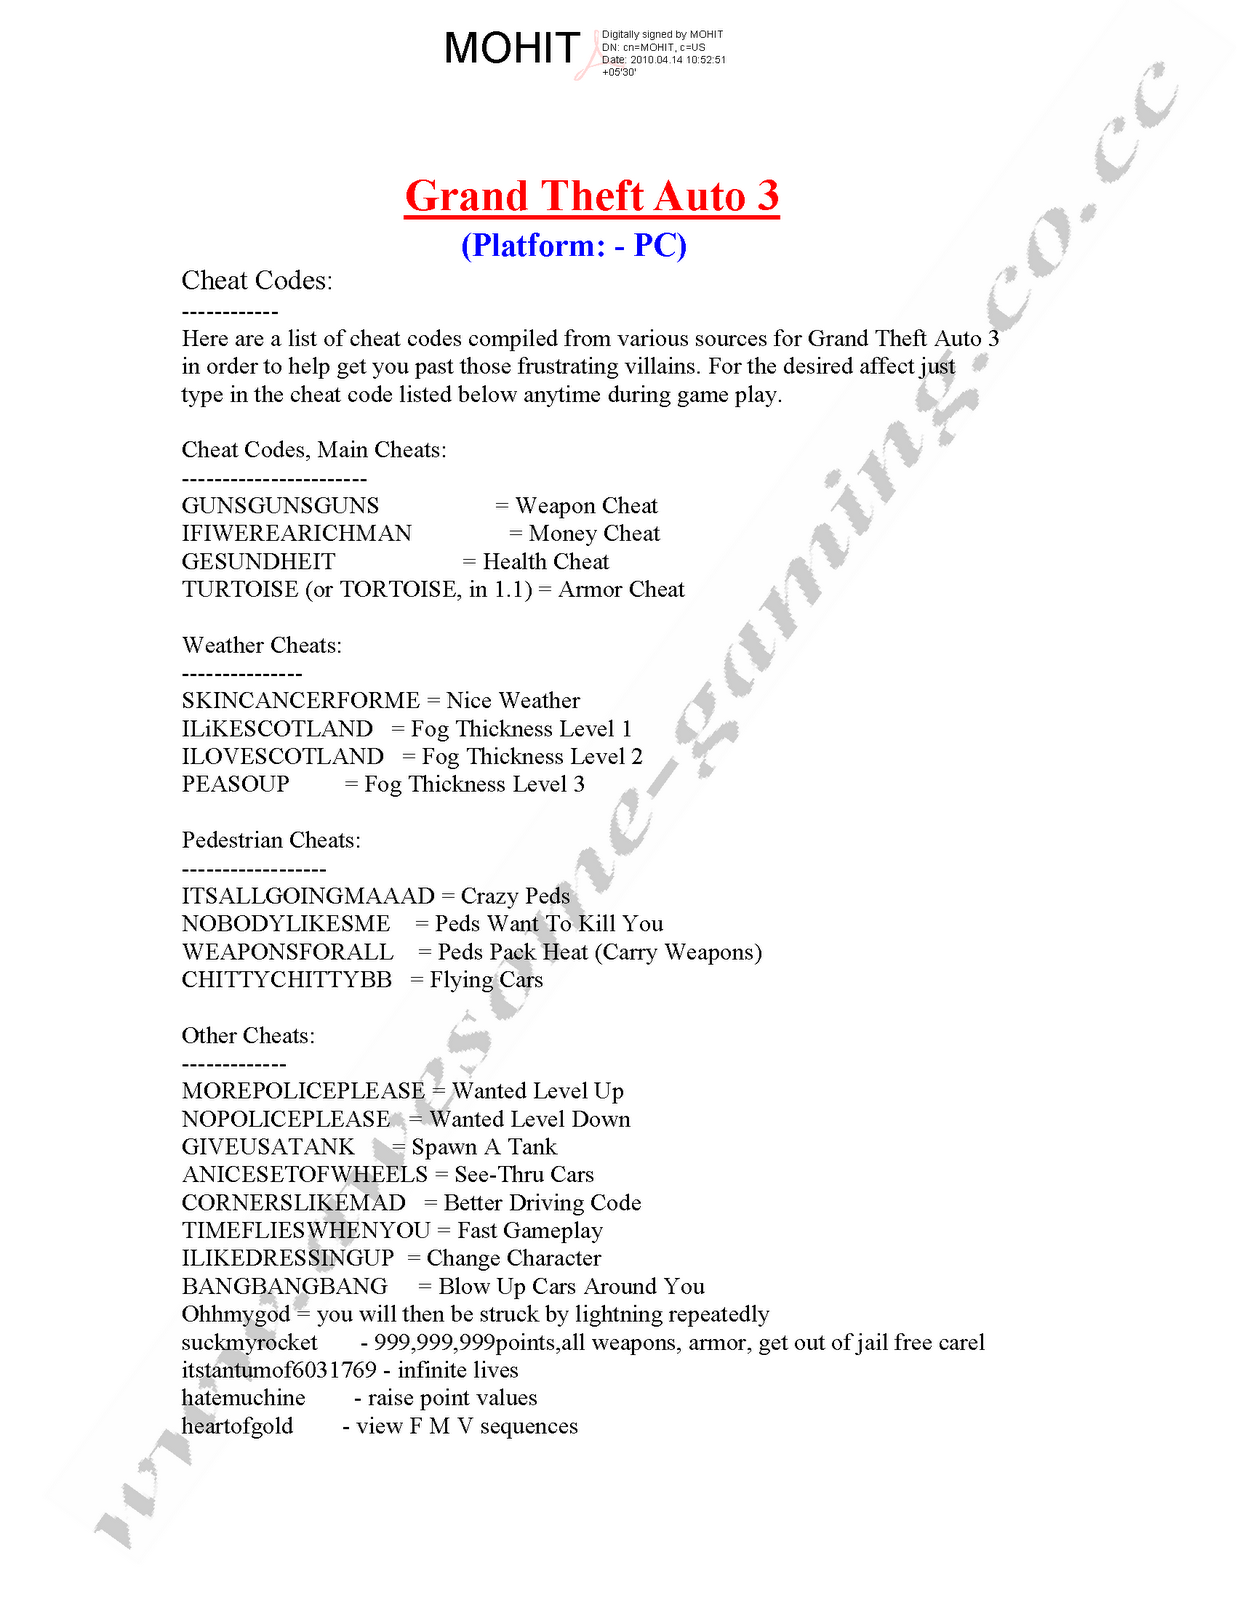 CHEAT CODE FOR GRAND THEFT AUTO 3 (PC Versioin)